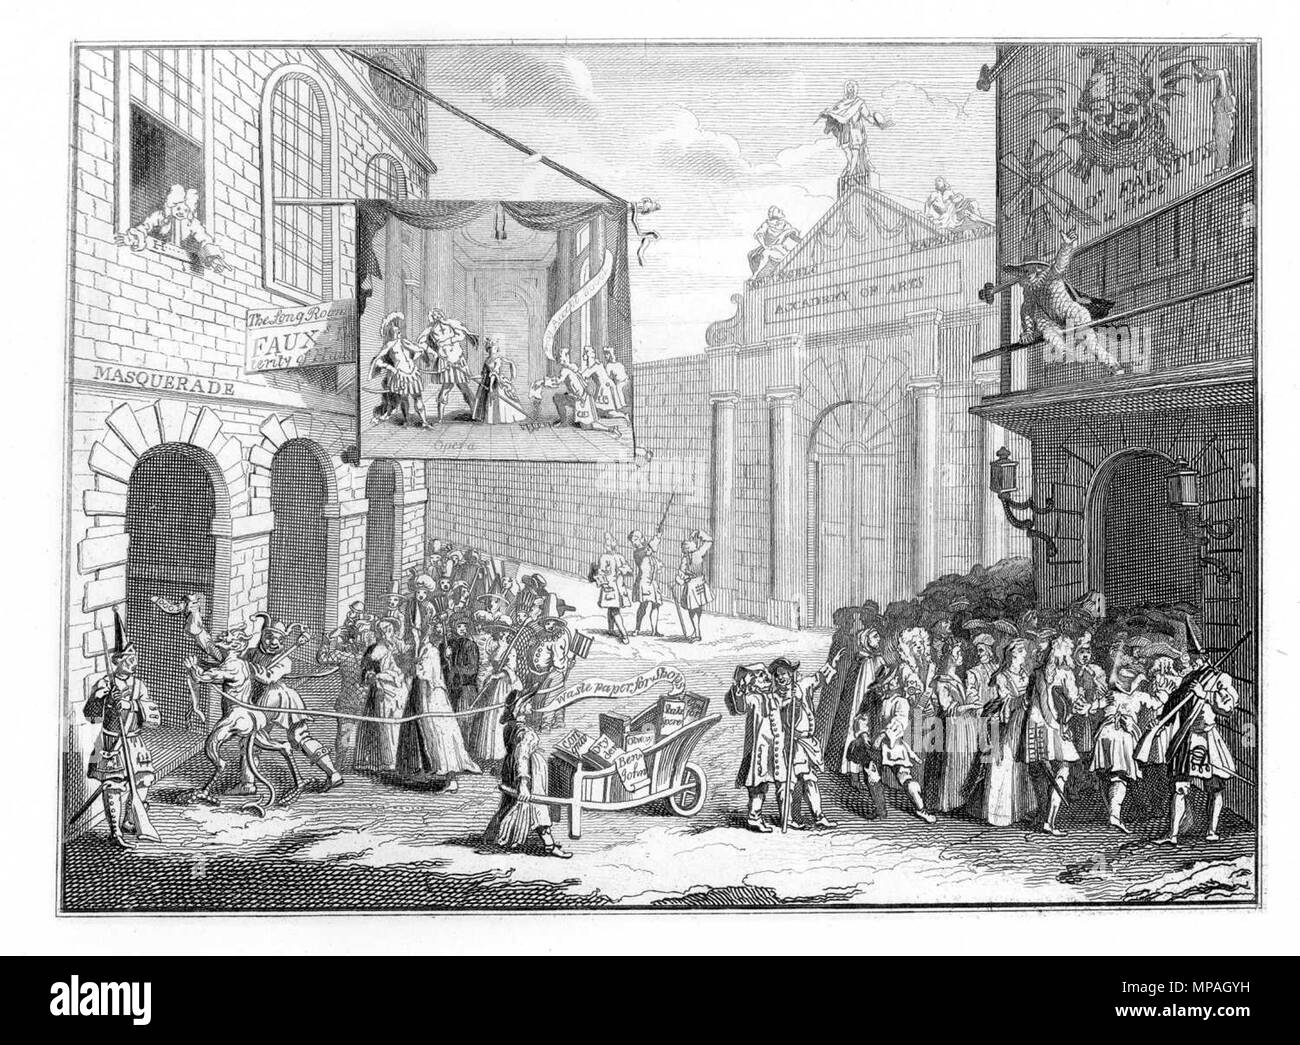 . English: Masquerades and Operas or The Bad Taste of the Town. A 1723 satire on the questionable tastes of London society by William Hogarth. The public are shown thronging to the entertainments of Heidegger, Rich and Fawkes while the great works of literature are carted of for scrap in a wheelbarrow . 1723.   William Hogarth  (1697–1764)       Description British painter and engraver  Date of birth/death 10 November 1697 25 October 1764  Location of birth/death London London  Work location London, Chiswick  Authority control  : Q171344 VIAF: 17268409 ISNI: 0000 0001 2099 3749 ULAN: 500004242 Stock Photo